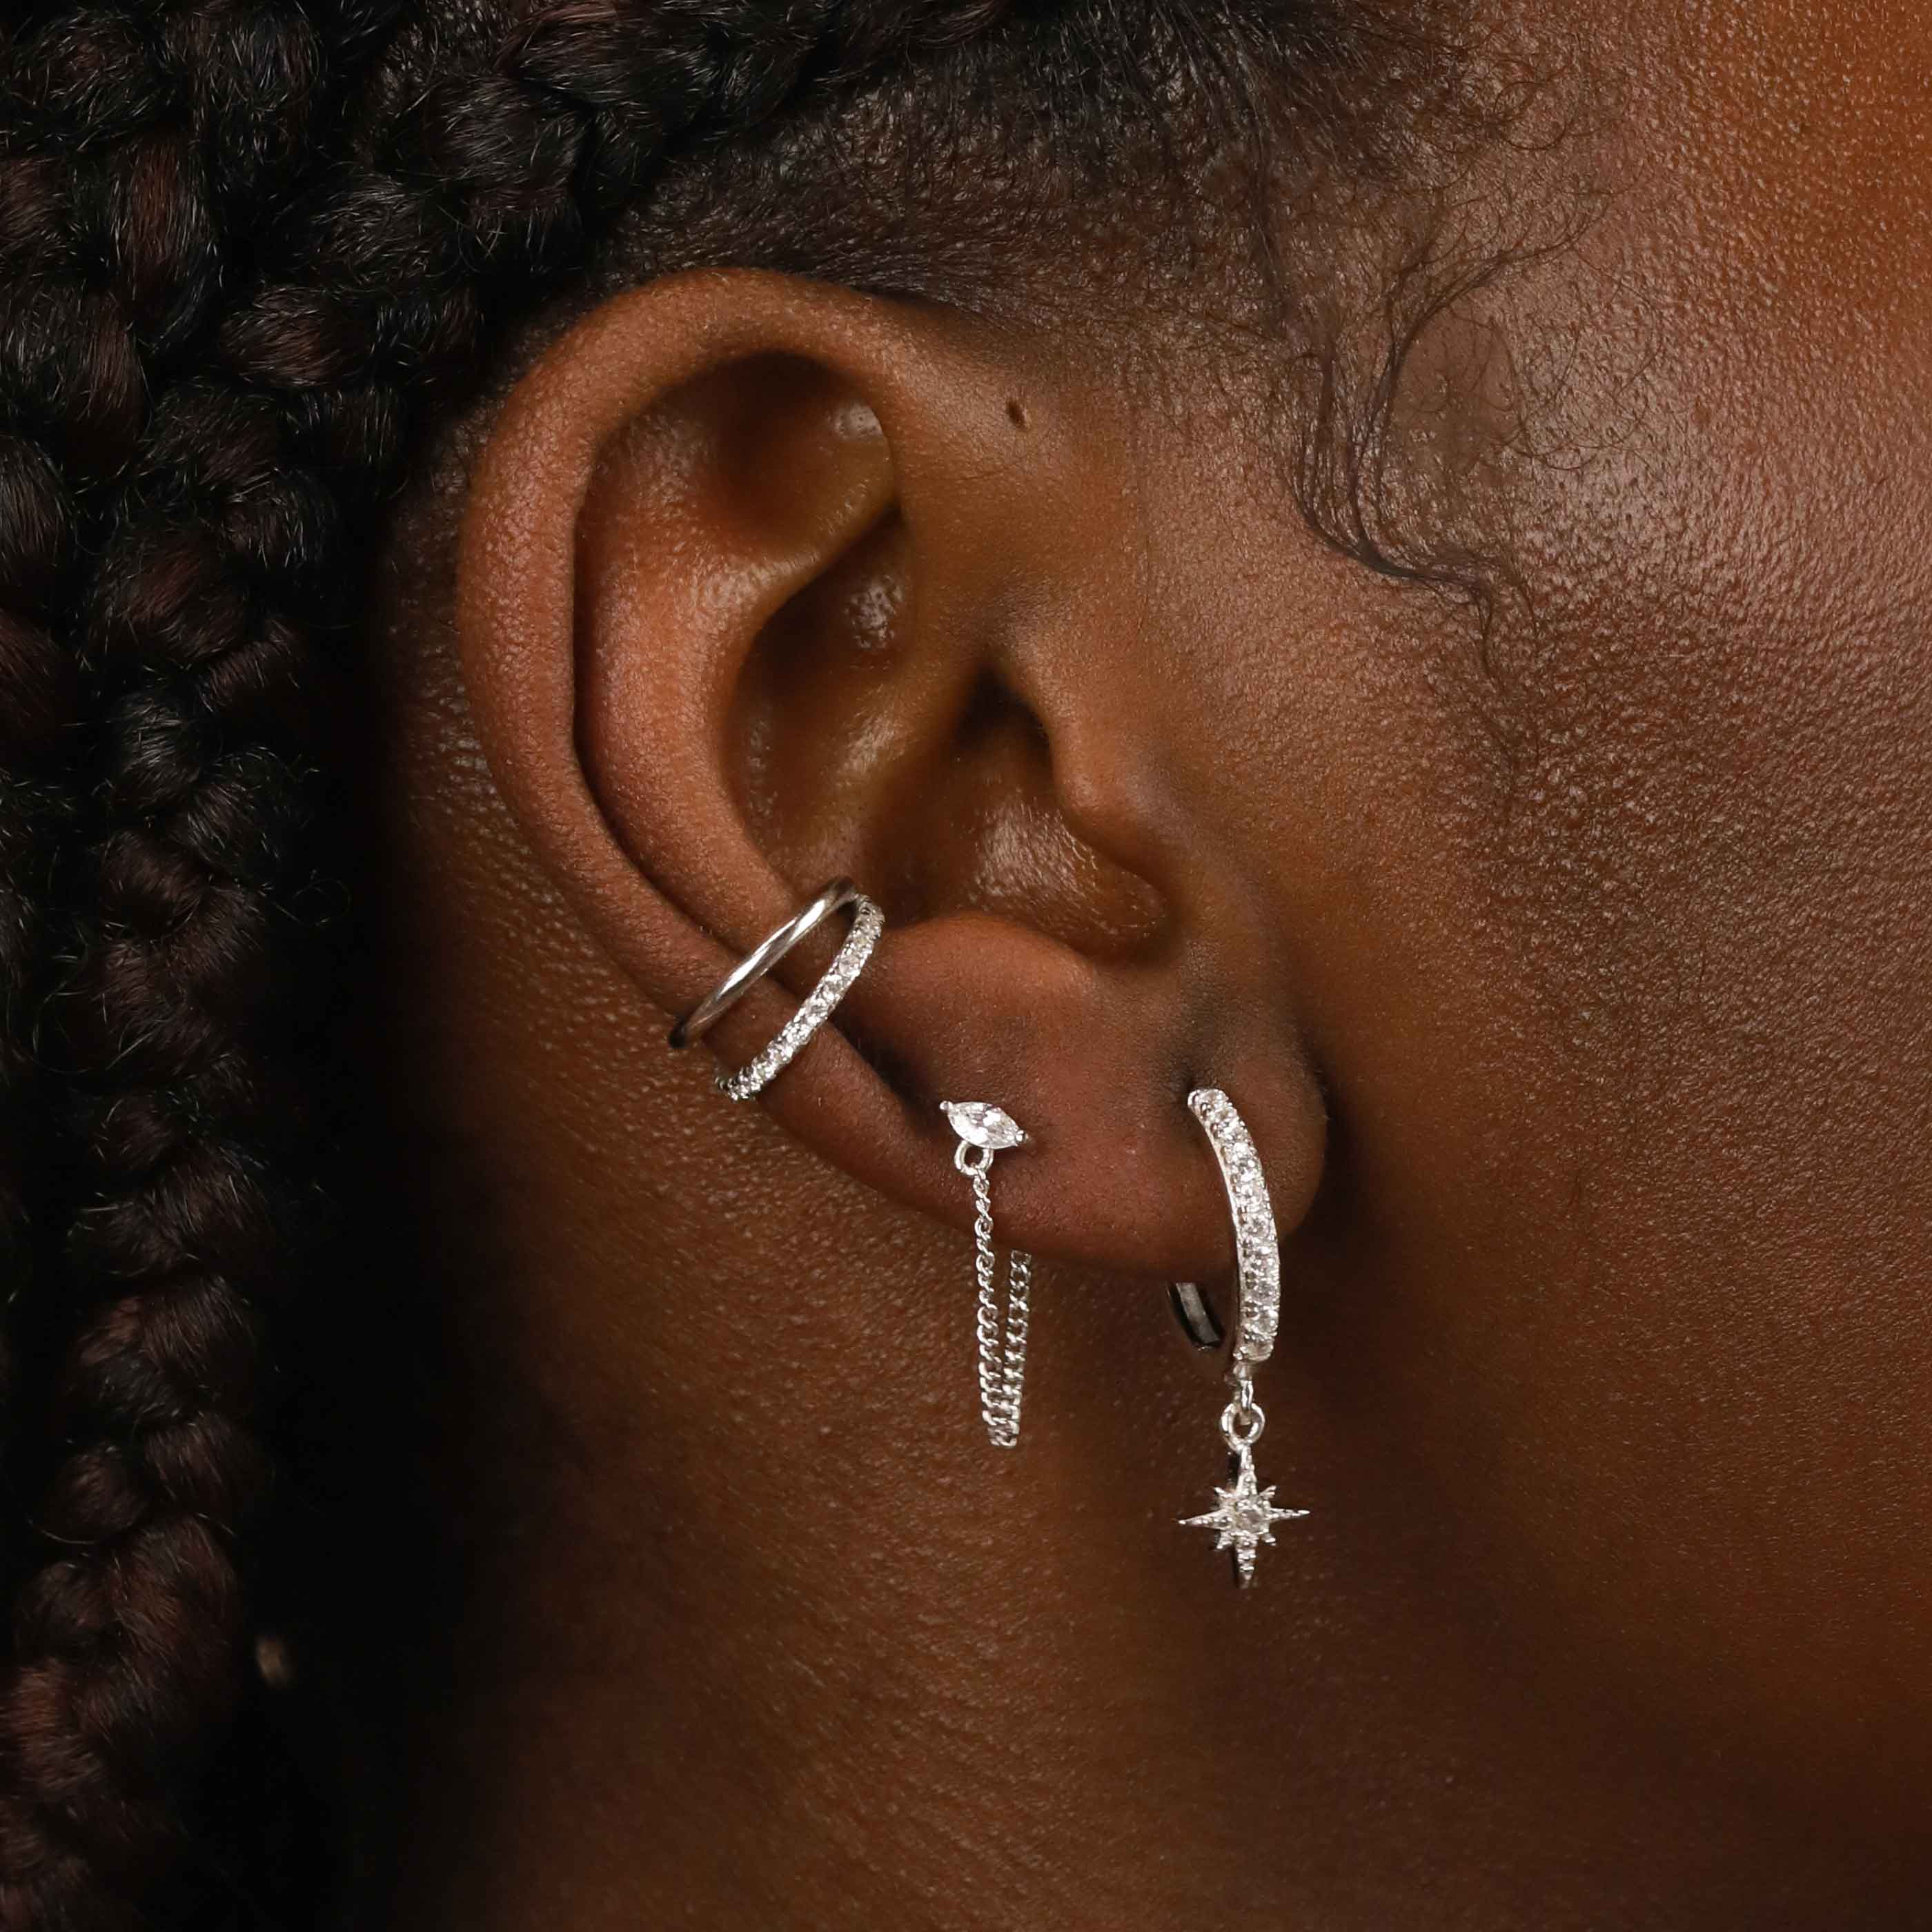 Crystal Star Hoops in Silver worn with other earrings